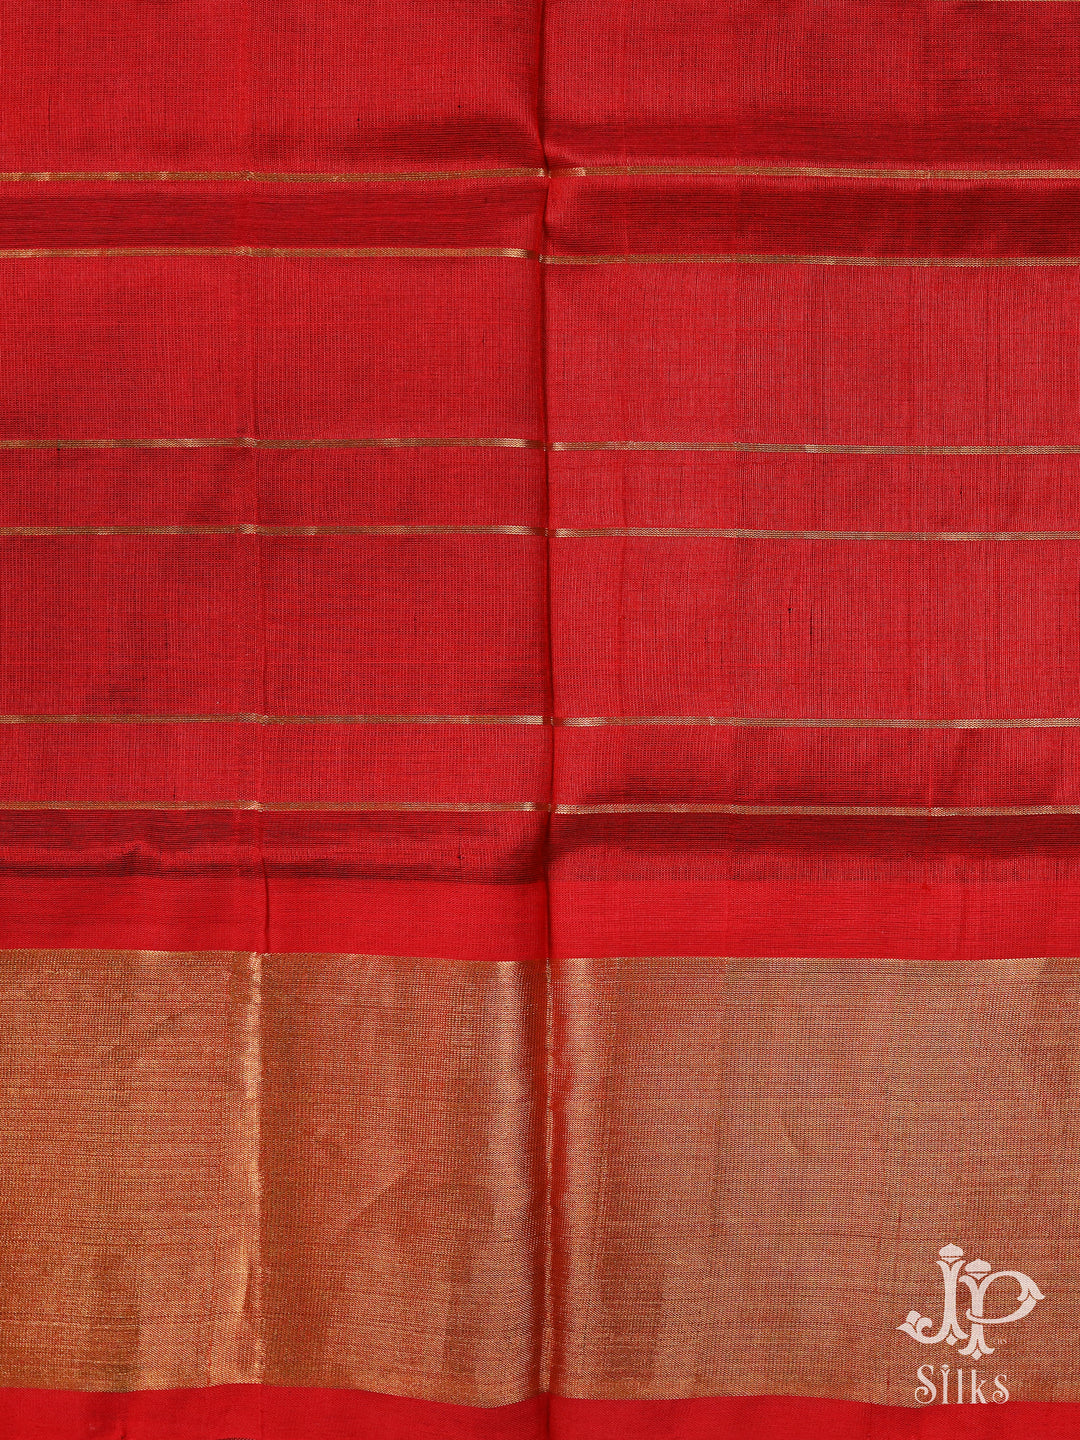 Off-White and Red Silk Cotton Saree - D34 - View 3